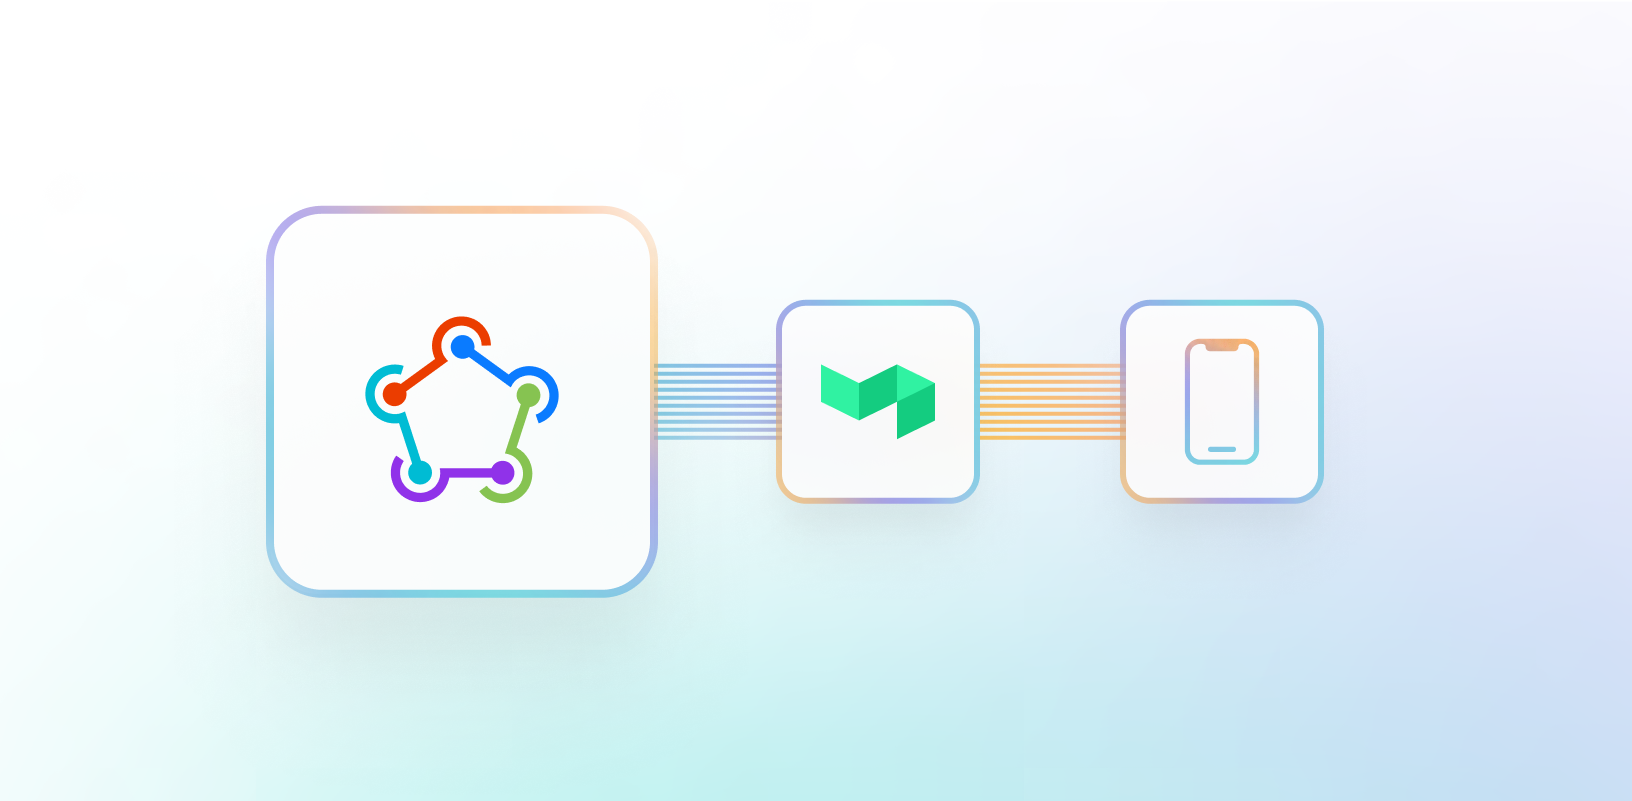 Three icons, connected to each other. Fastlane on the left, Buildkite in the center, and a mobile device on the right